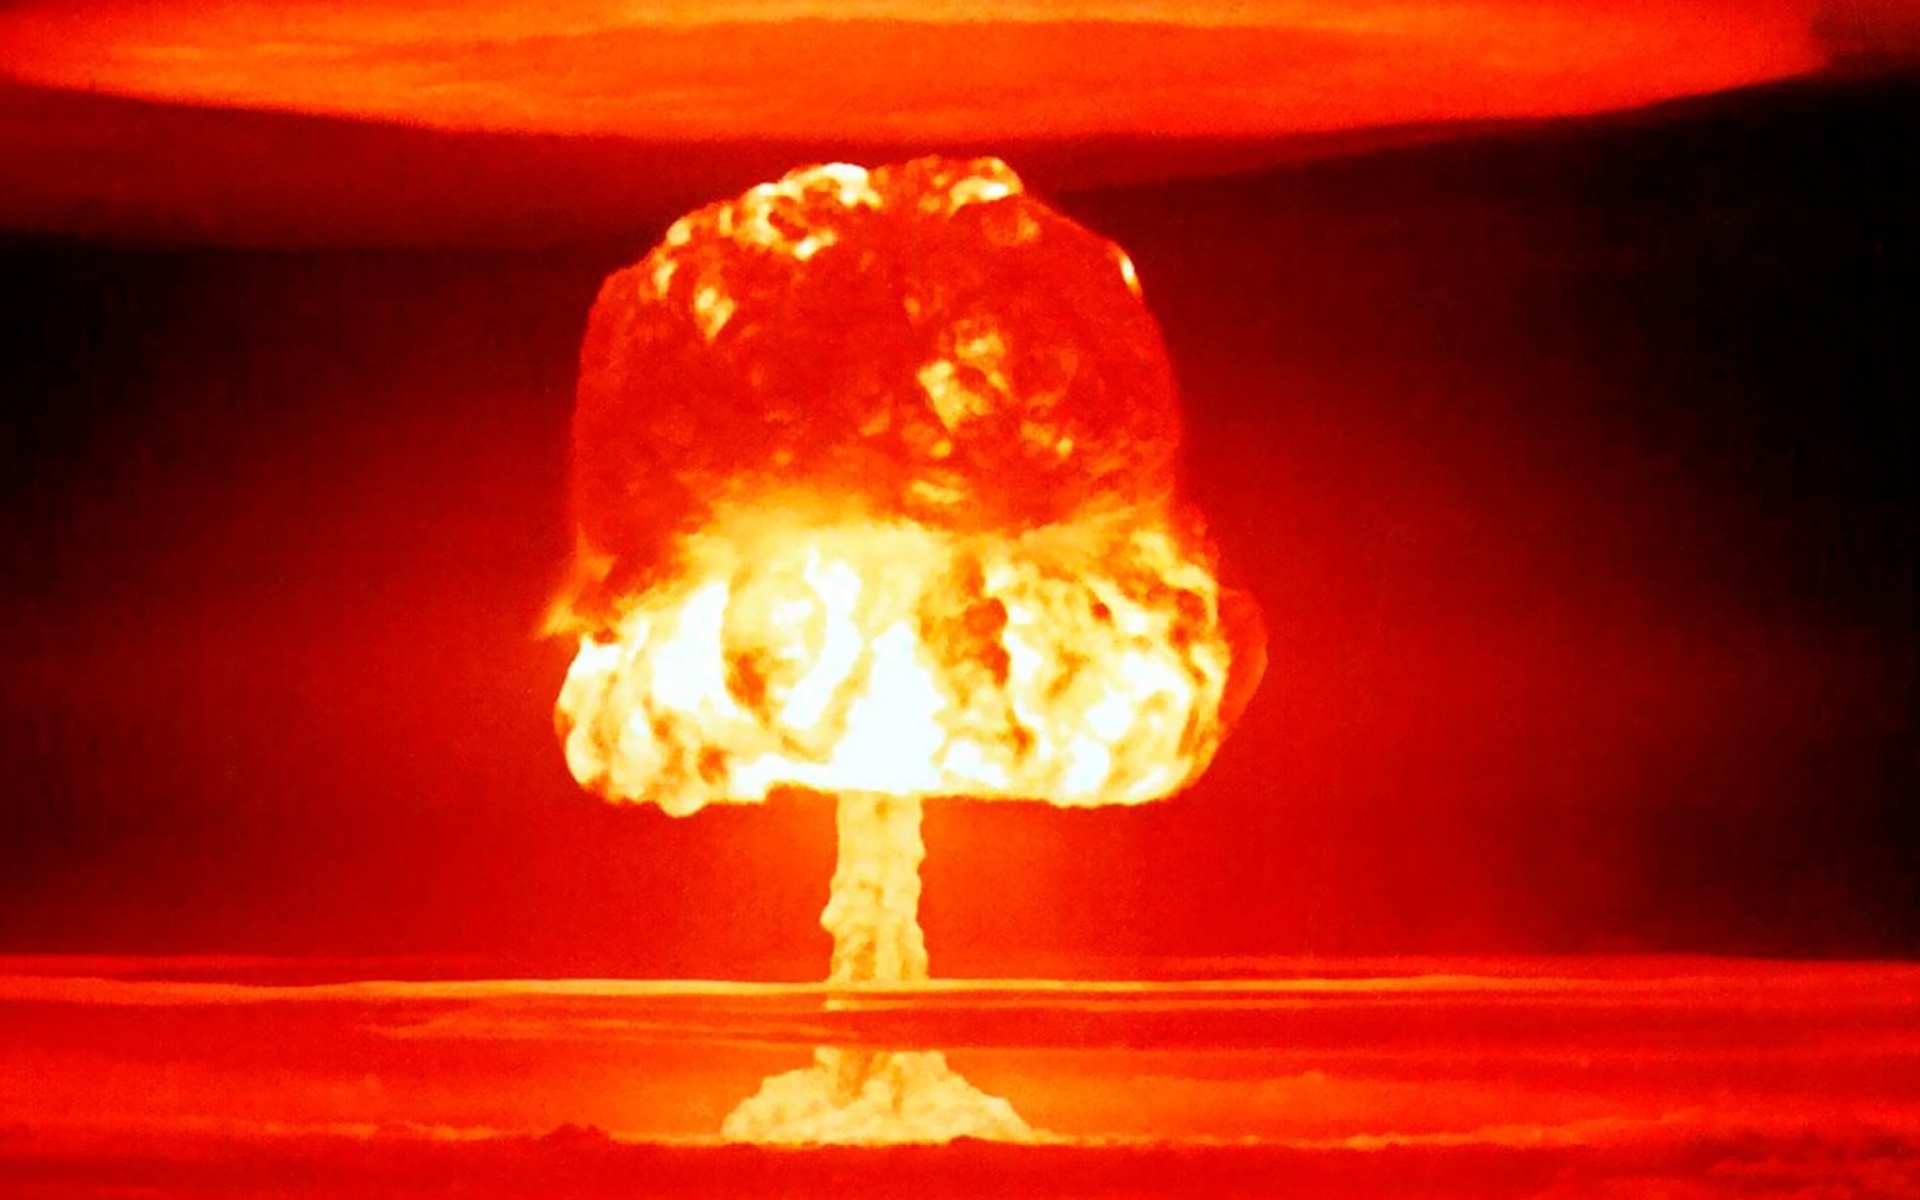 Nuclear explosion wallpaper 1920x1200